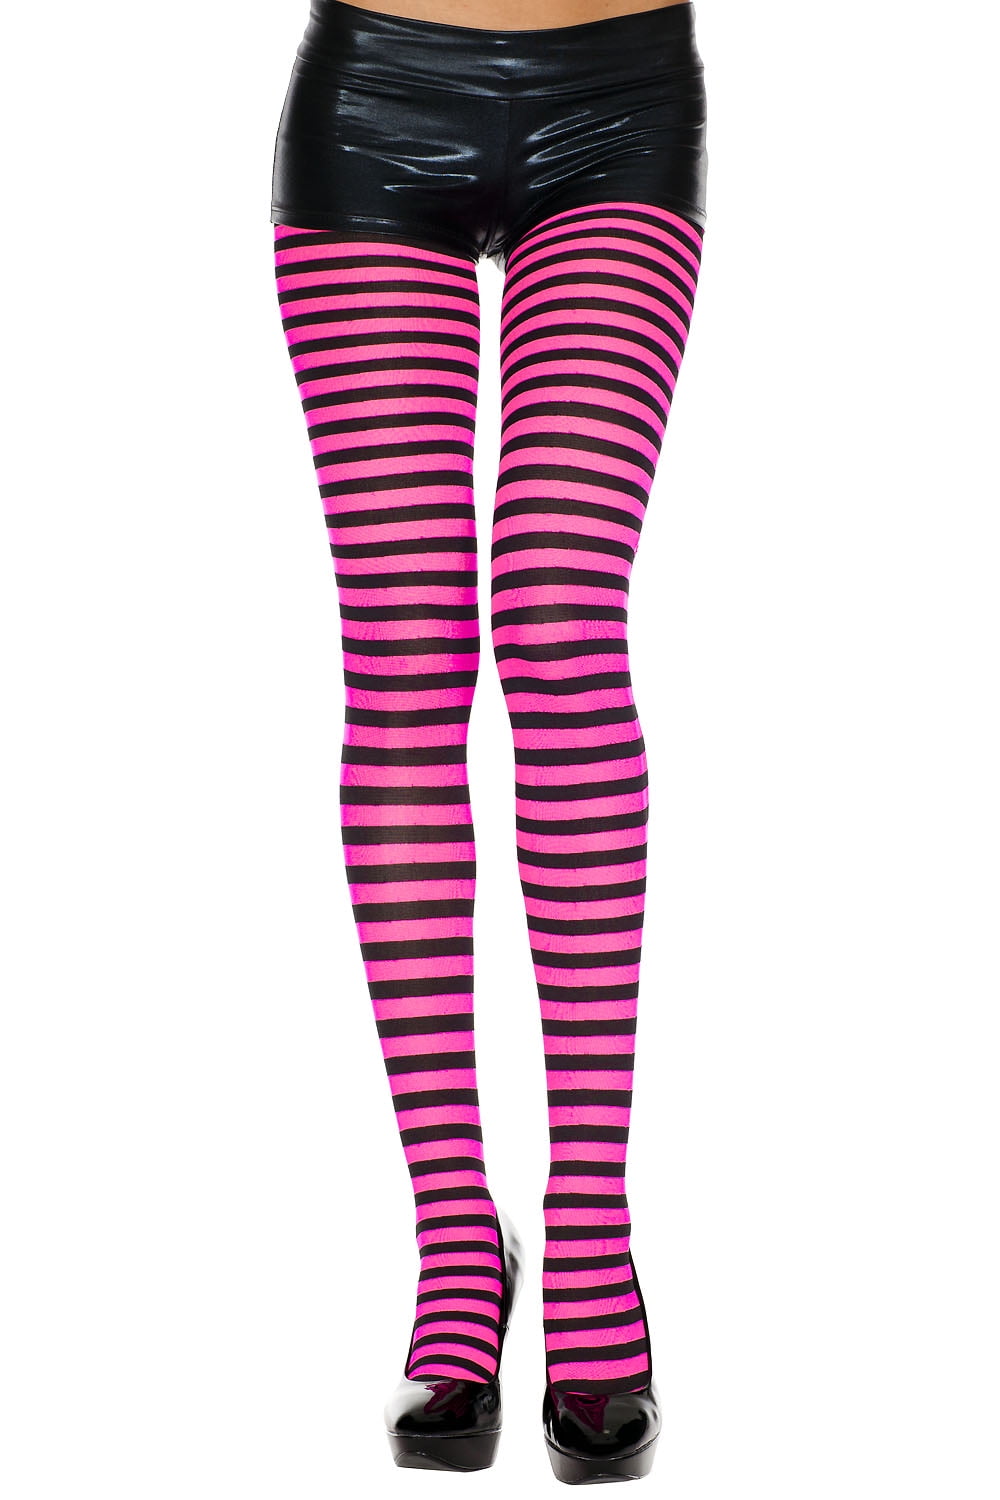 Lularoe Tall Curvy TC Love Arrows Stripes Black Pink Stripe Valentines a  Buttery Soft Leggings fits Adult Women Sizes 12-18 at  Women's  Clothing store